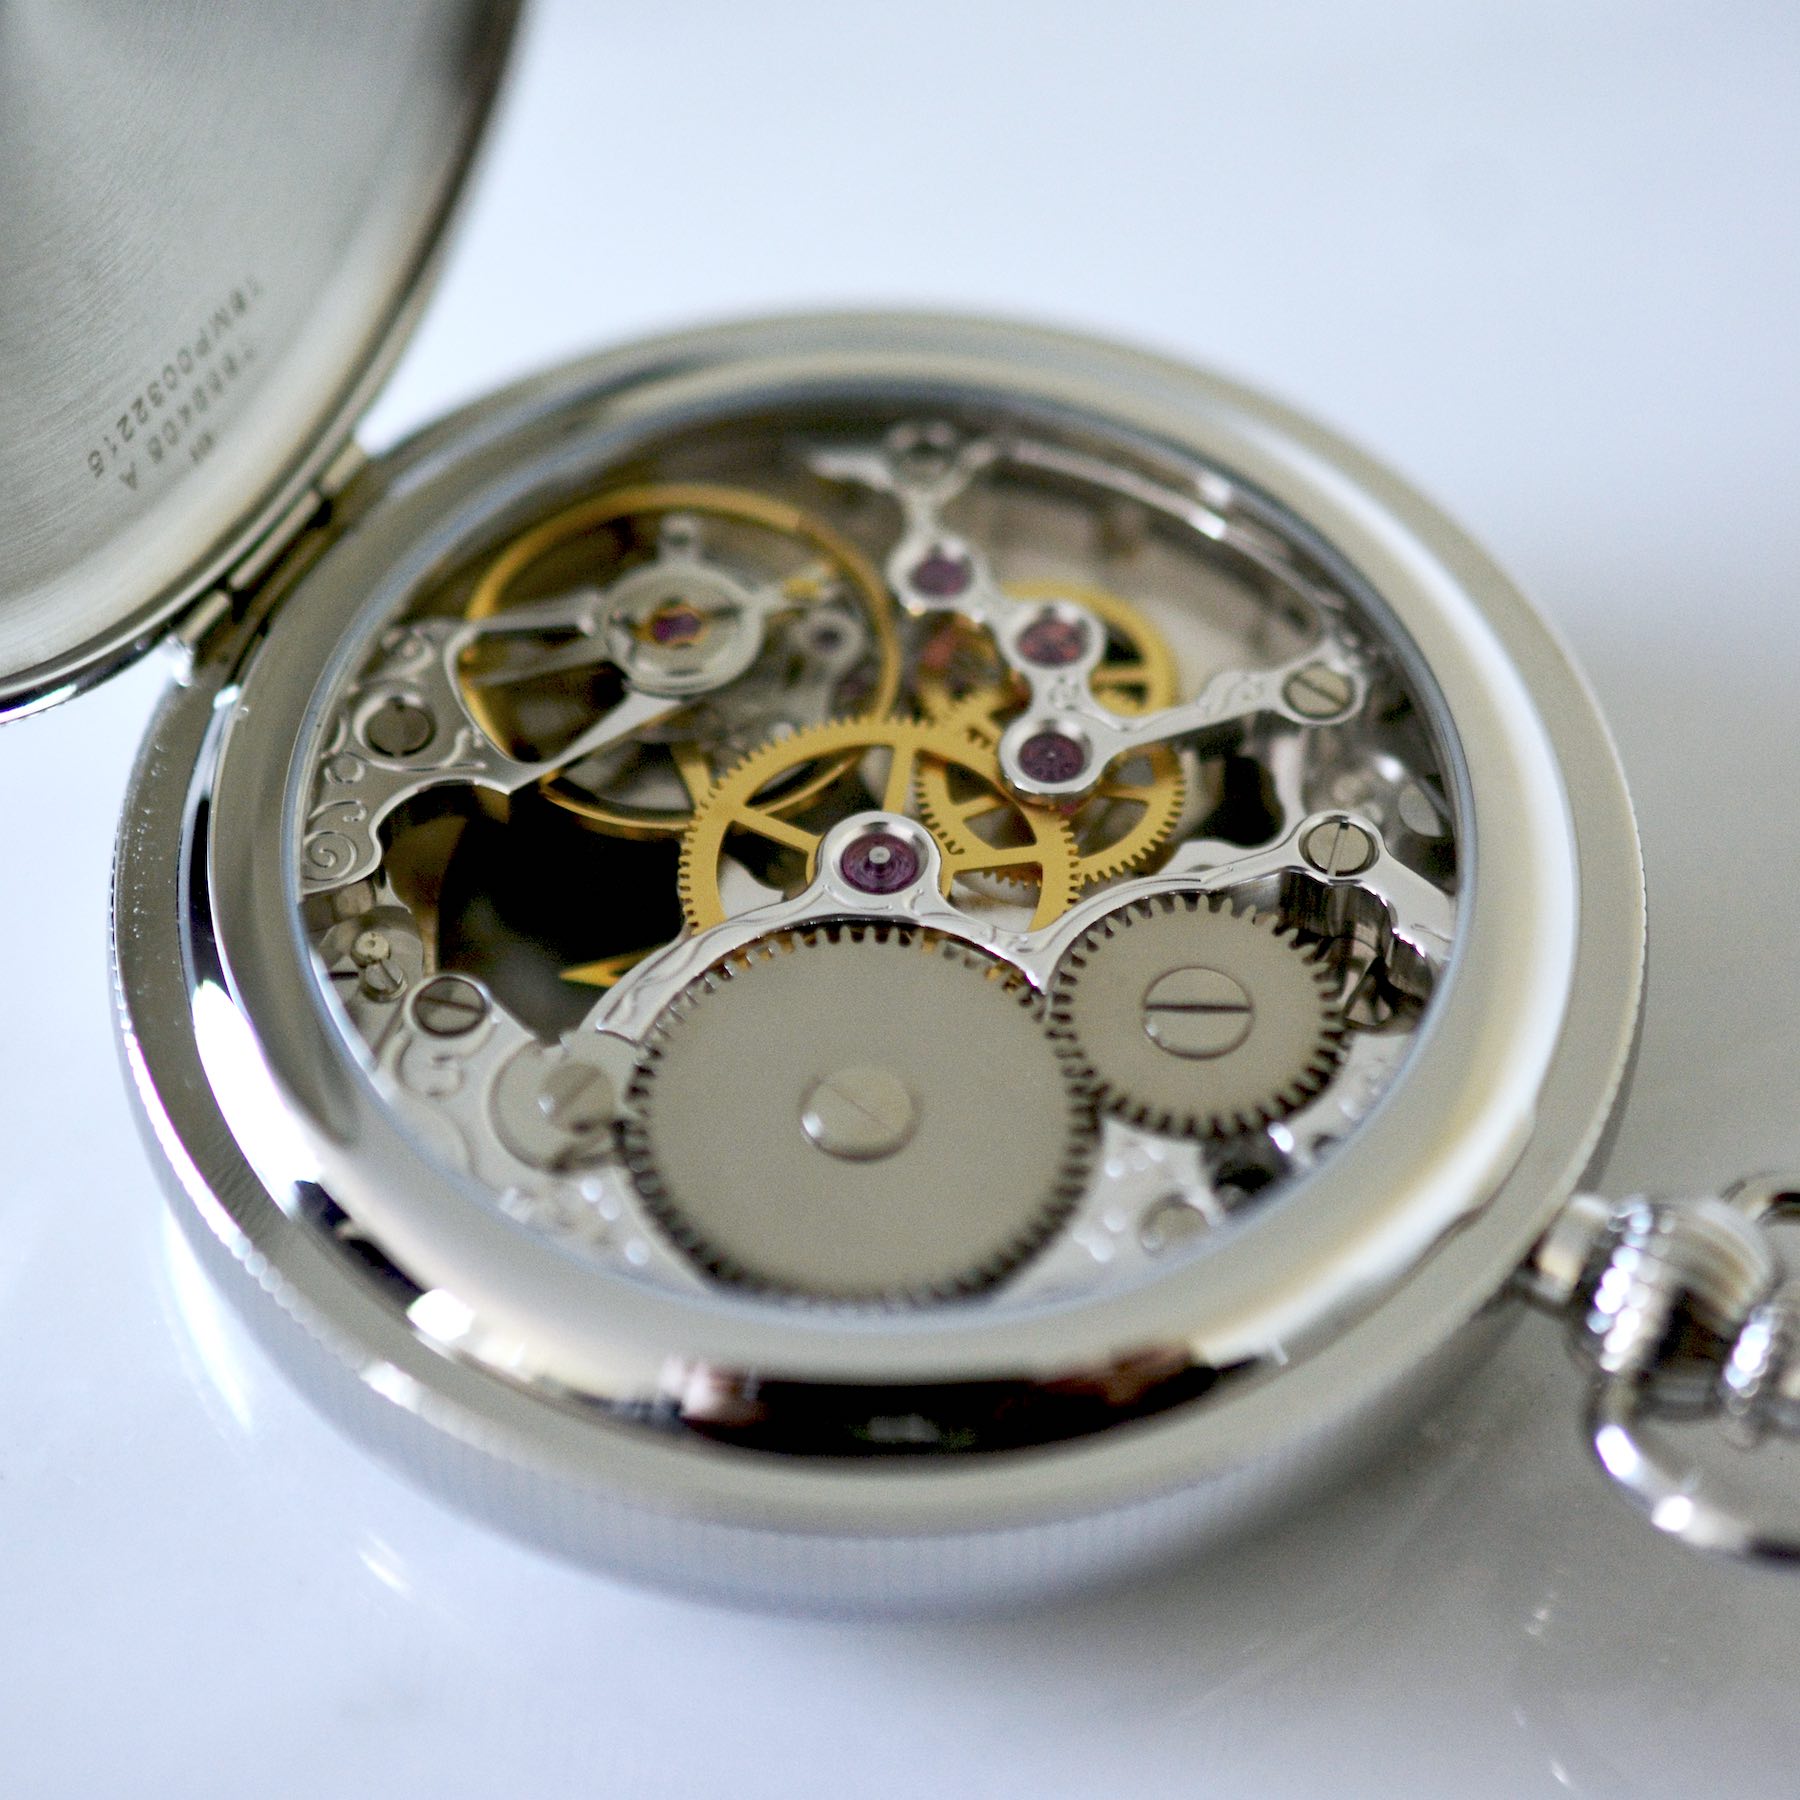 Is There Still a Place for Pocket Watches in the 21st Century